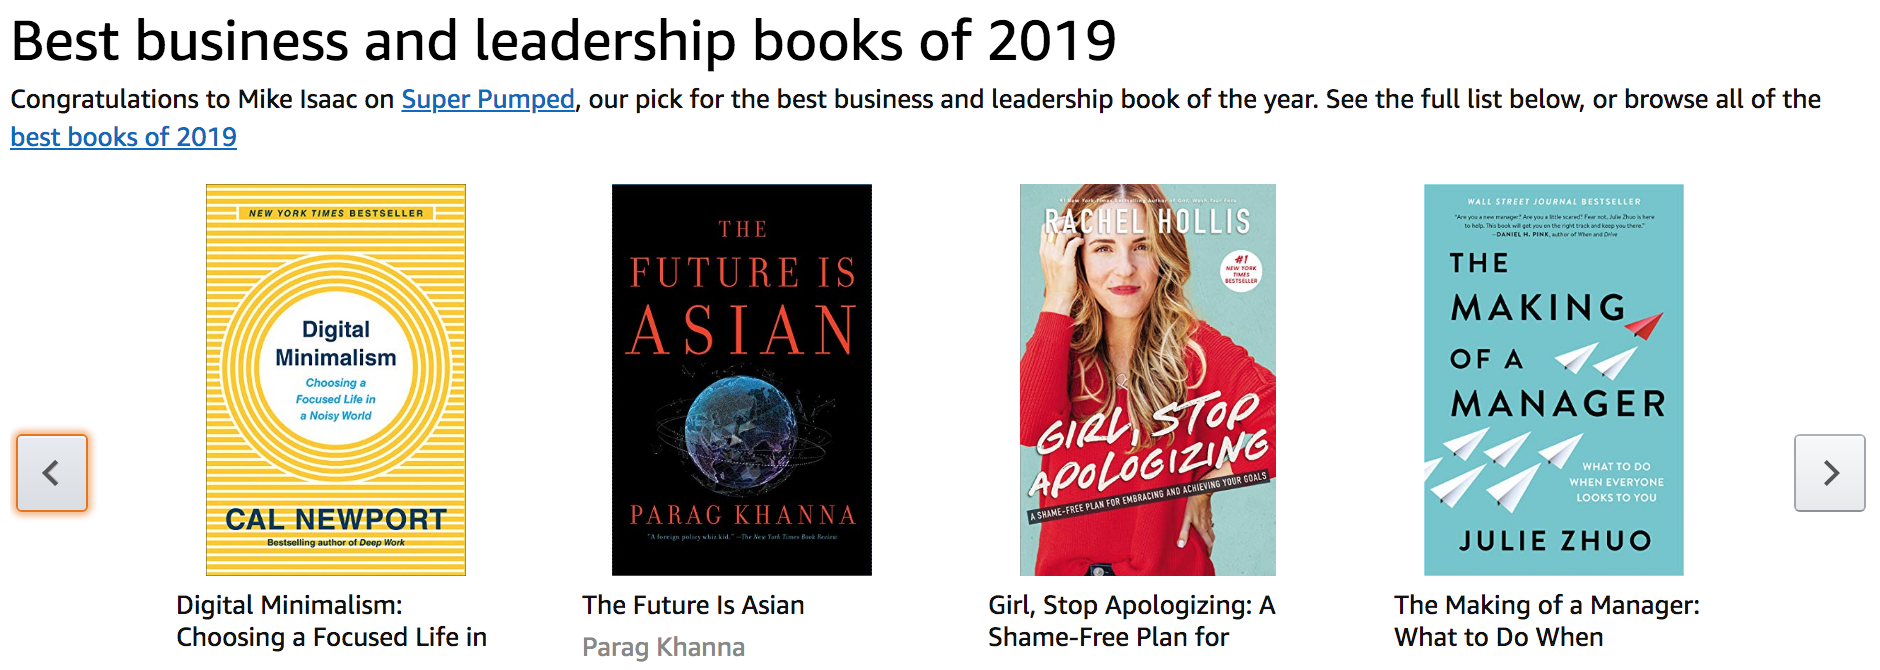 Amazon’s Top Business Books of 2019